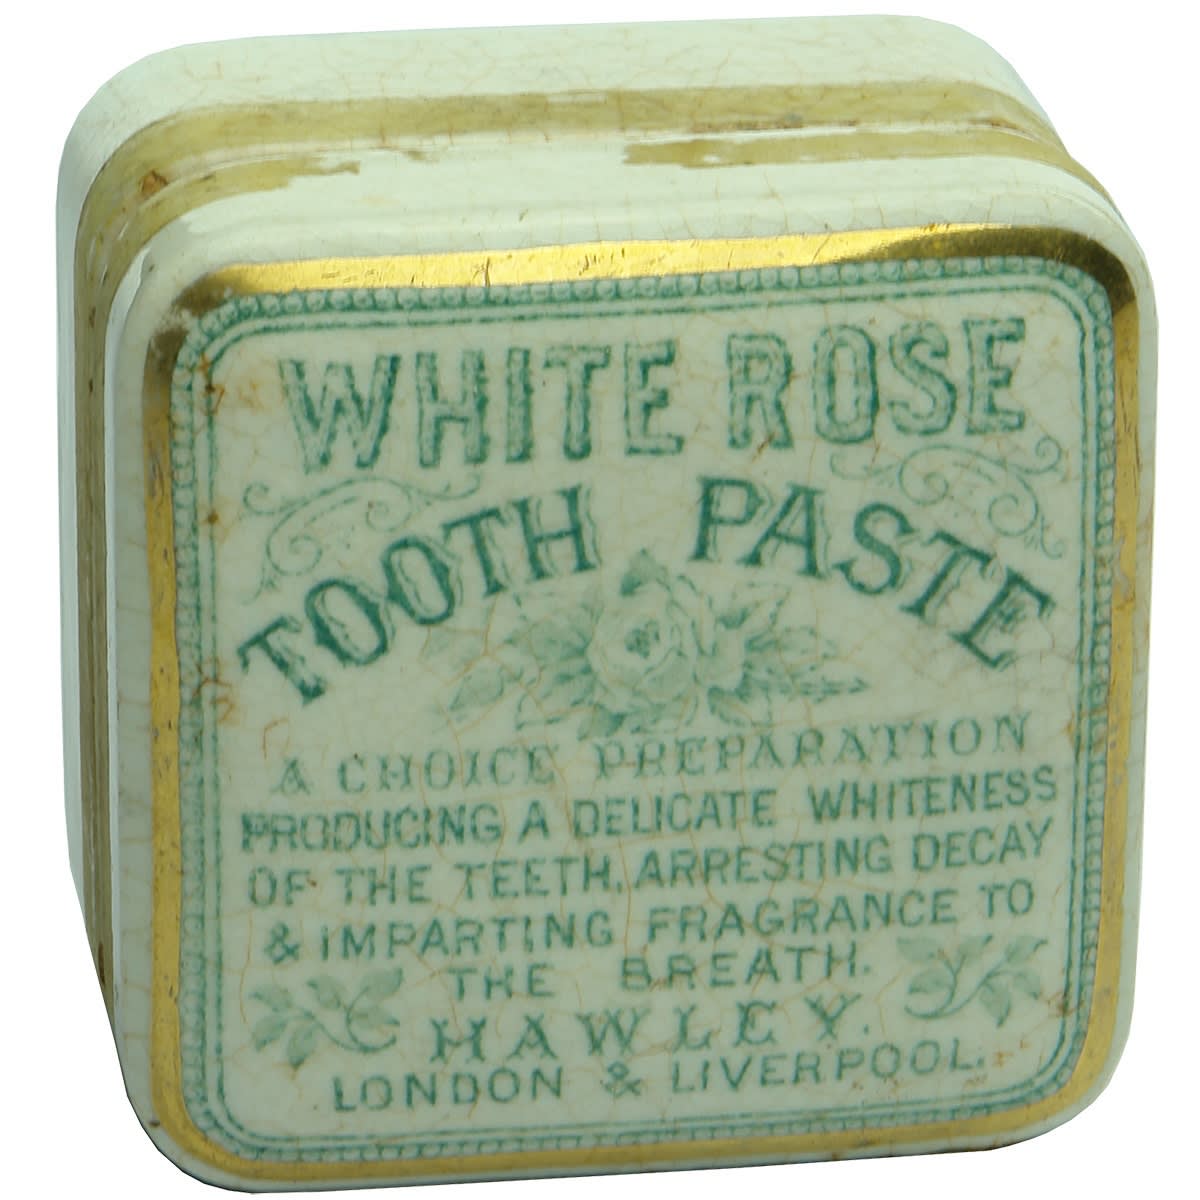 Pot Lid. Hawley, London & Liverpool. White Rose Tooth Paste. Green Print.